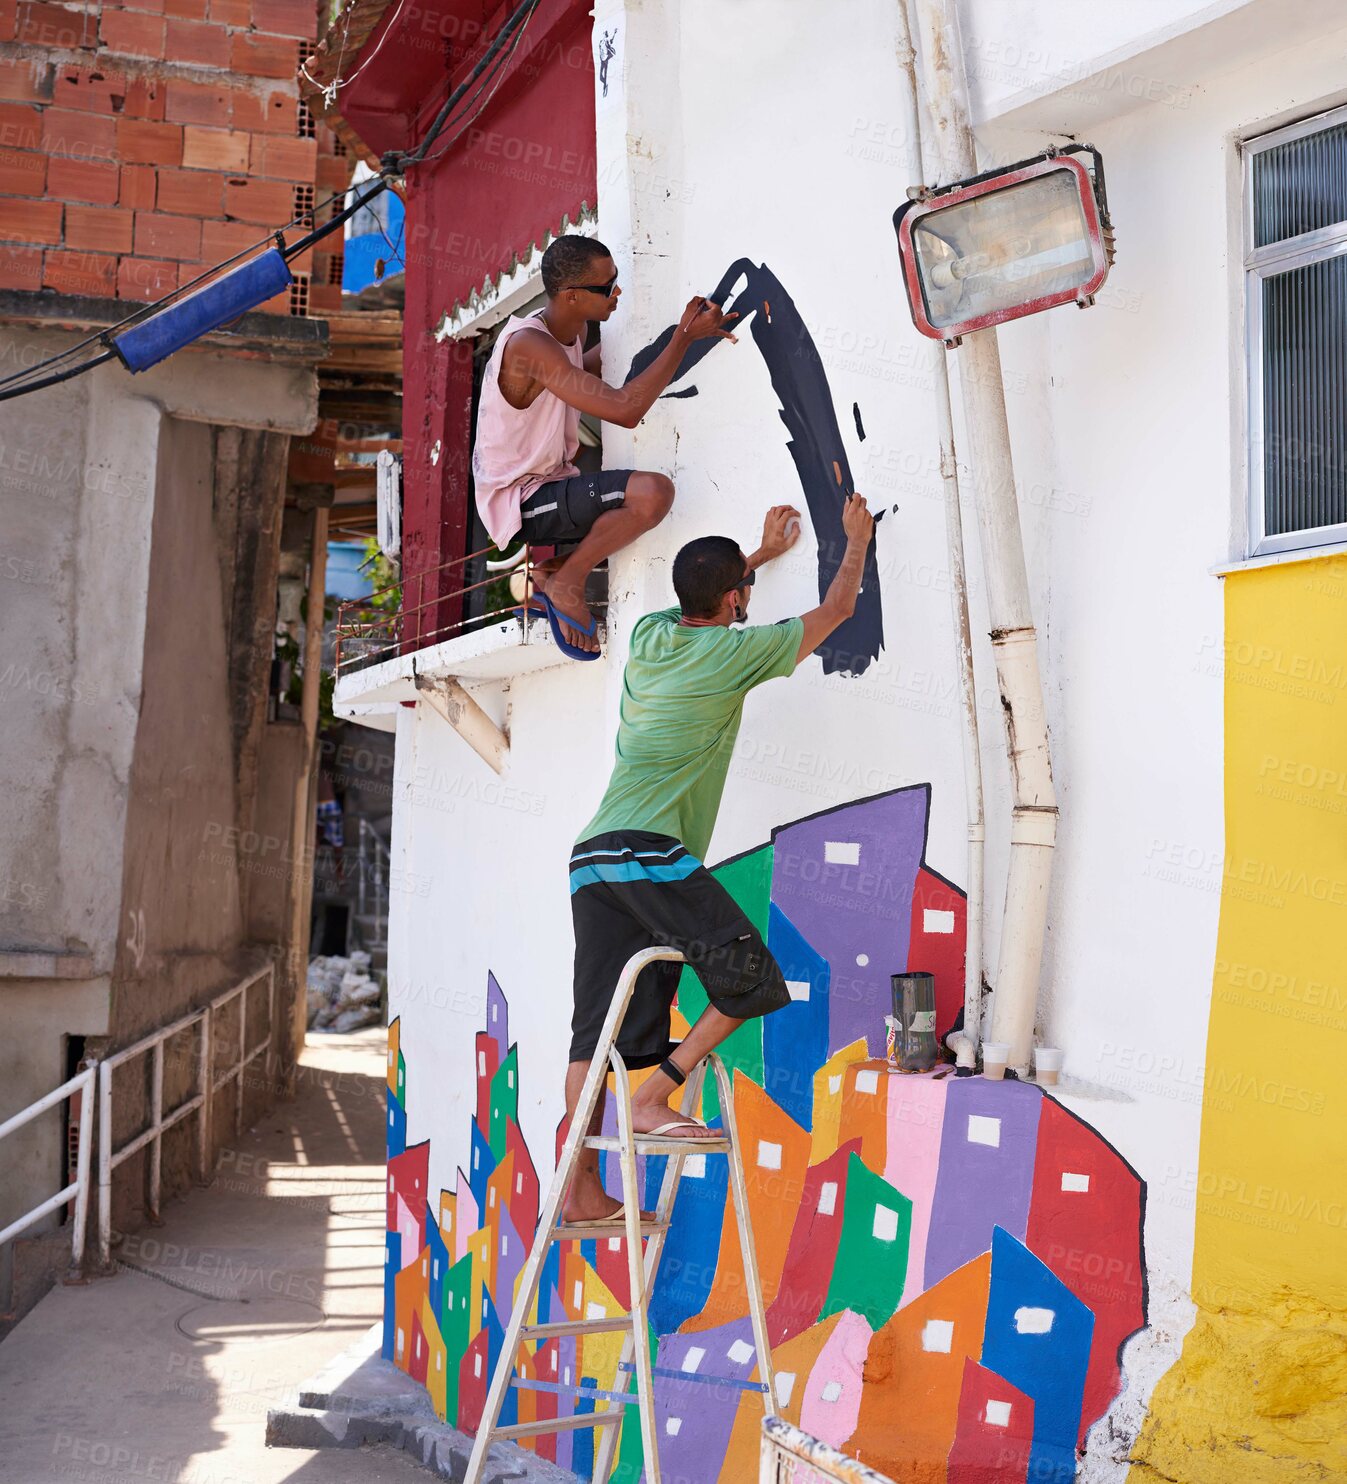 Buy stock photo Shot of two young graffiti artists painting a design on a wall